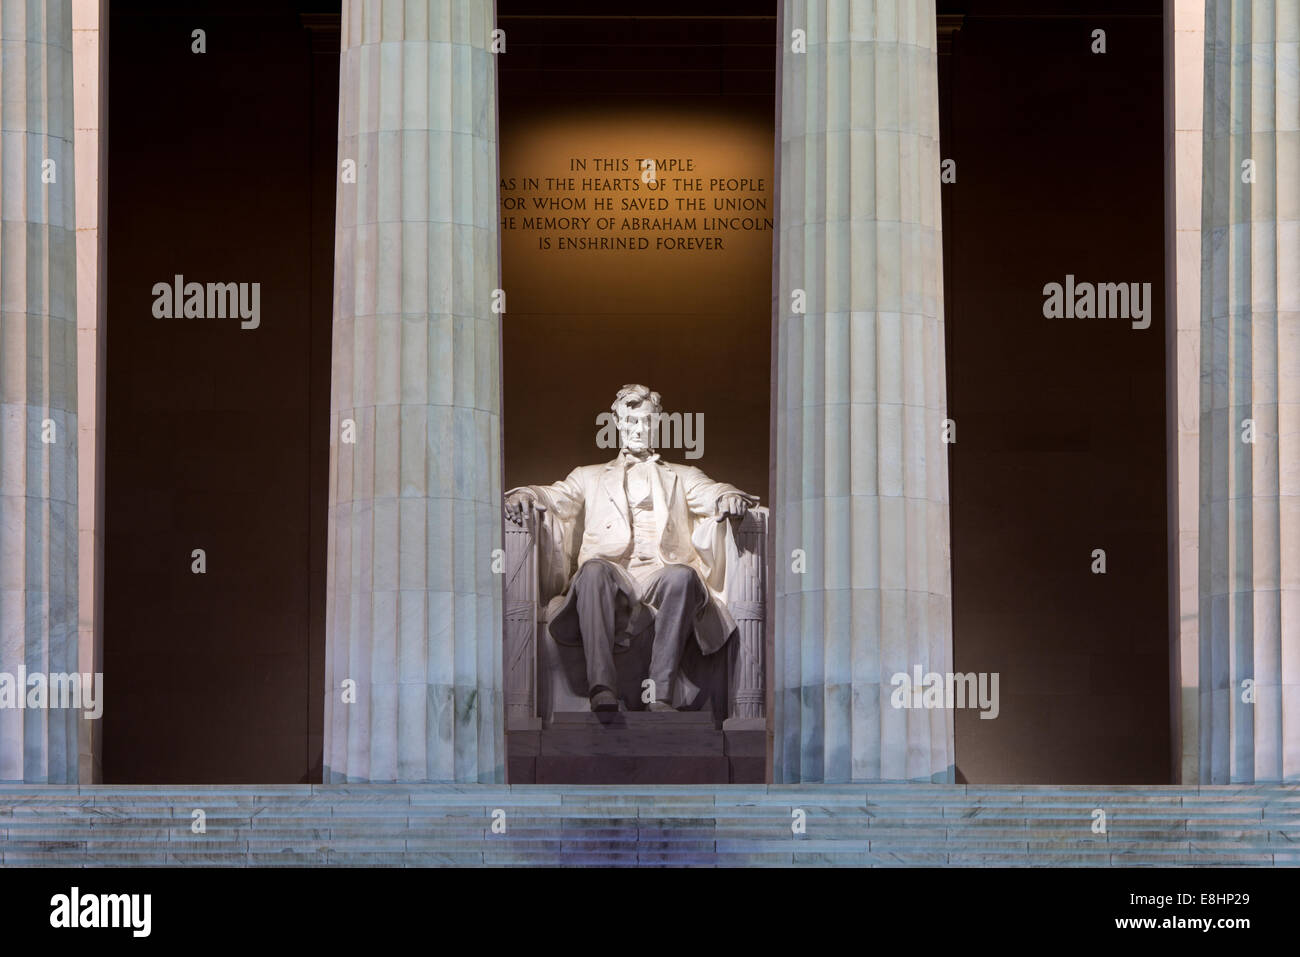 WASHINGTON DC, USA - The Lincoln Memorial, at the western end of the National Mall in Washington DC, under lights at night. Stock Photo